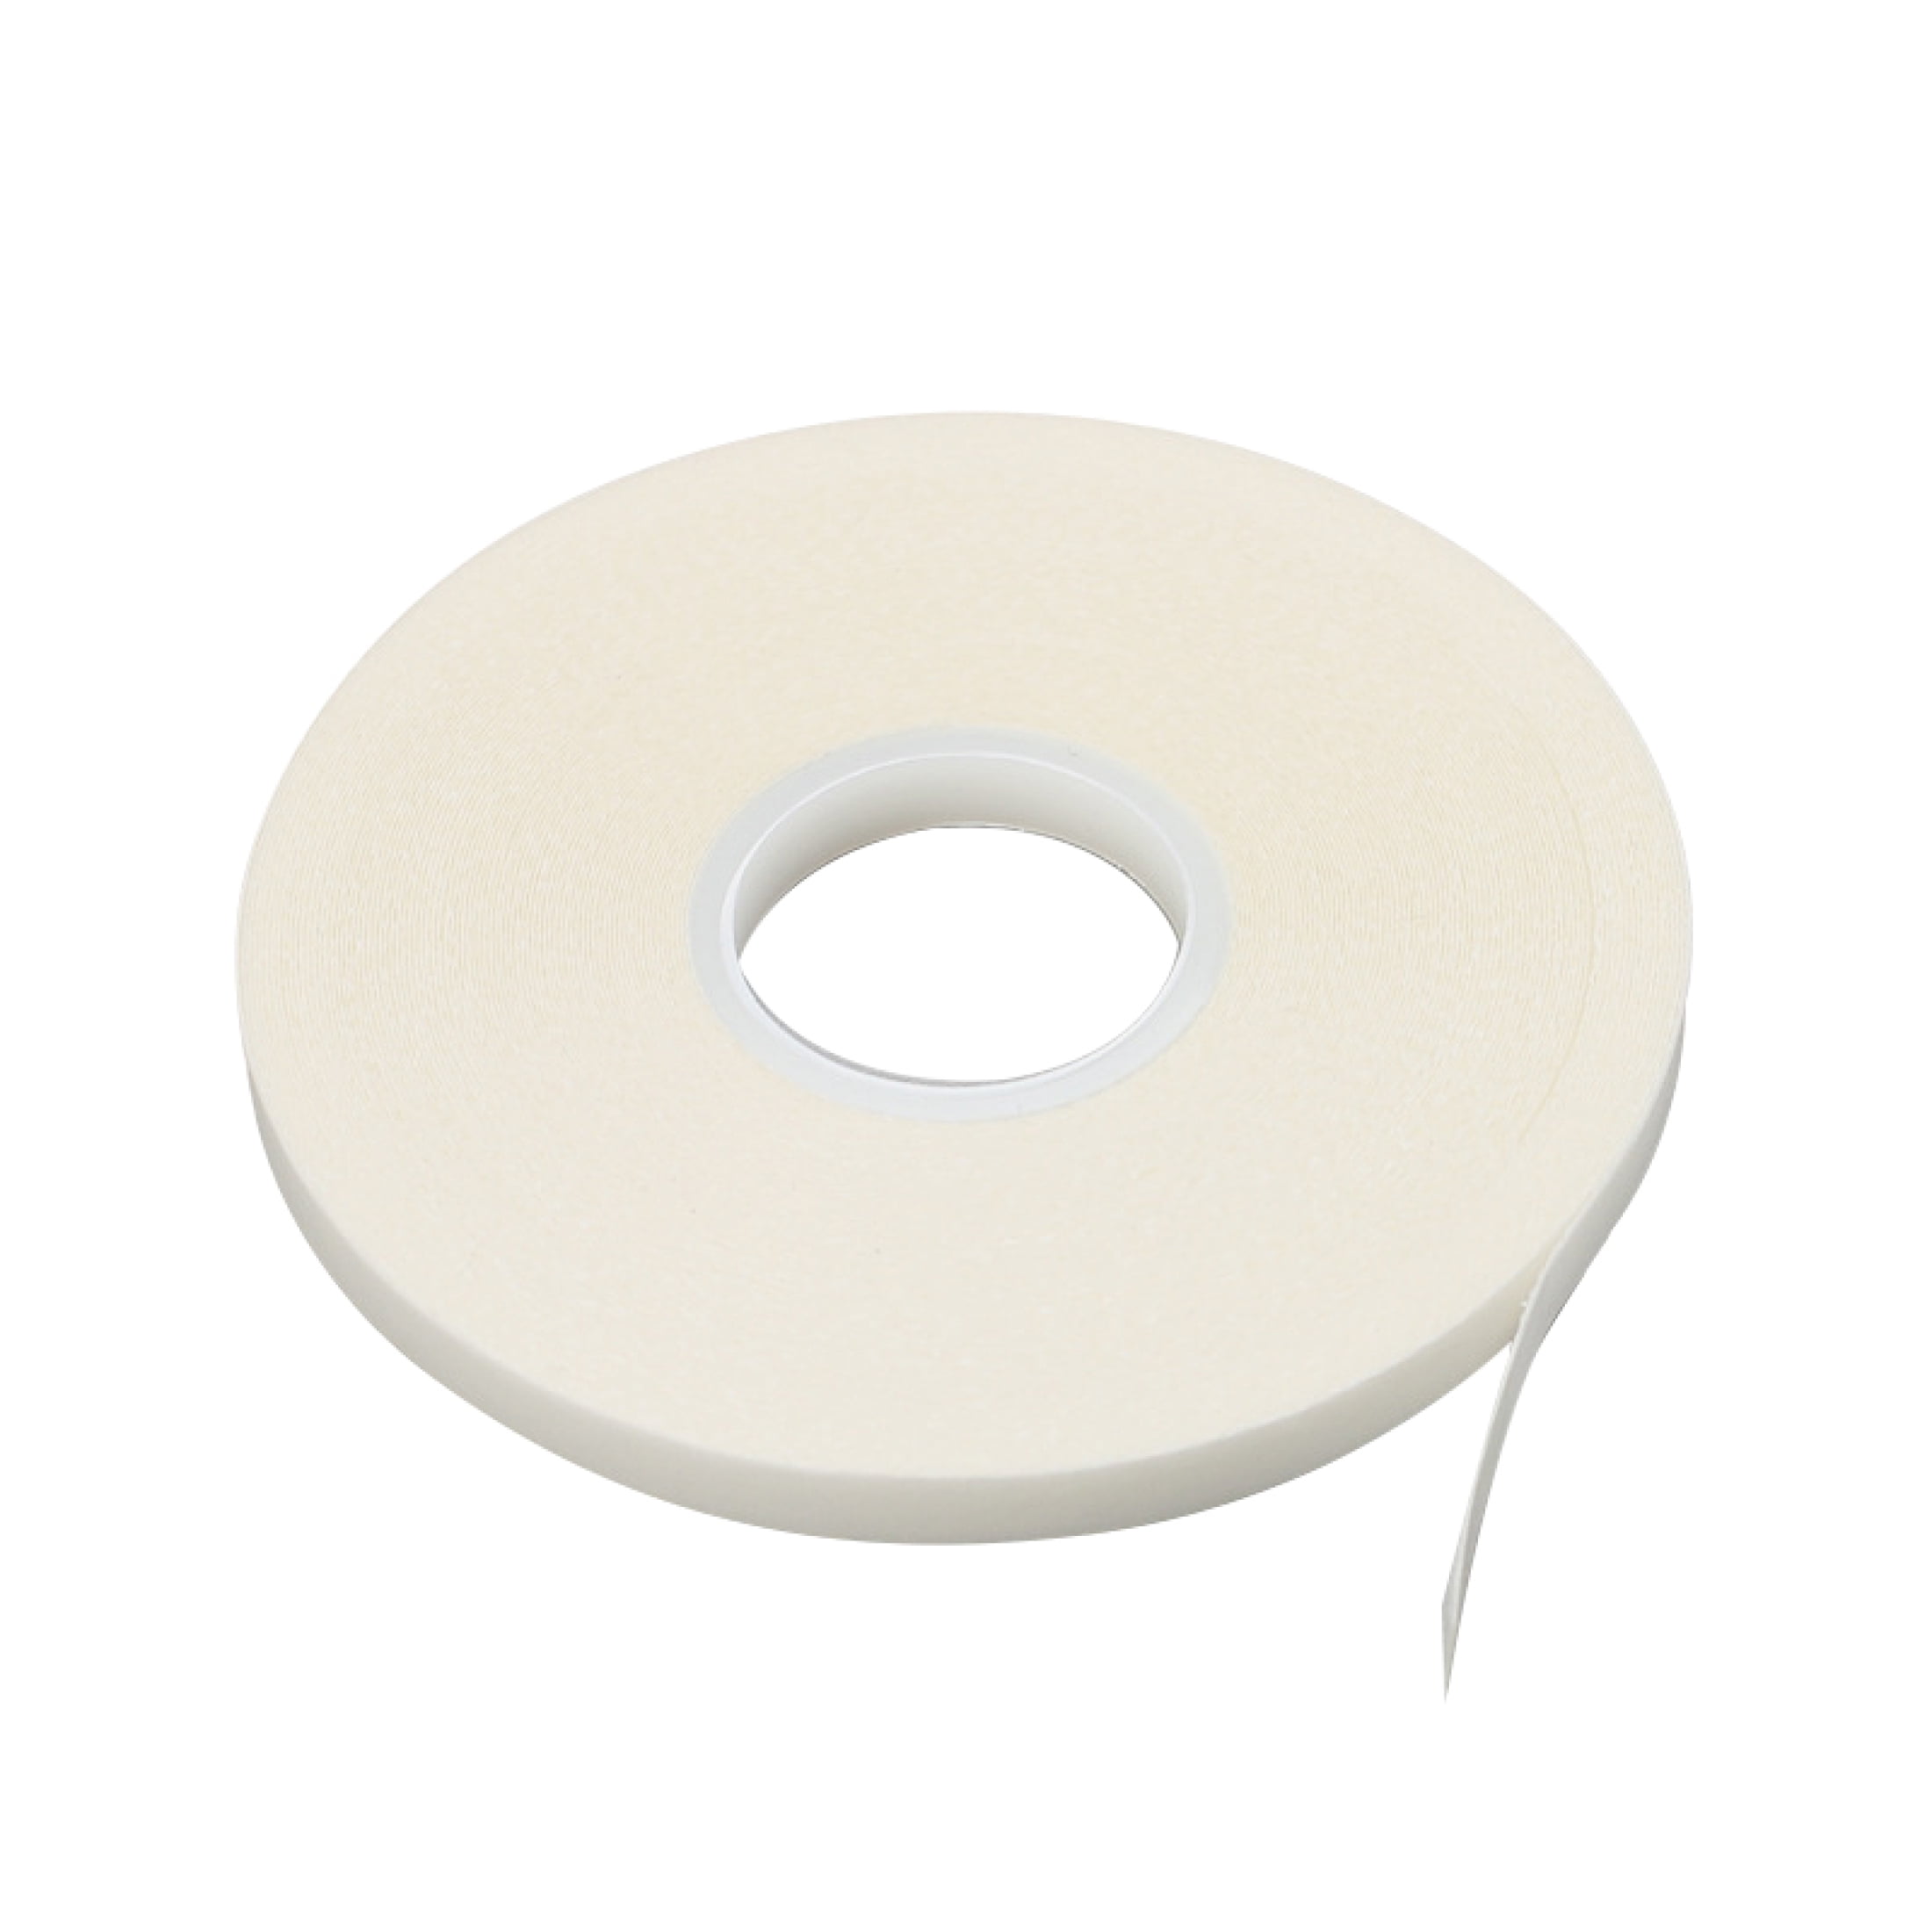 Double Sided Tape Strong Adhesive Sewing Tape Water-soluble Fabric for  Craft Class Office